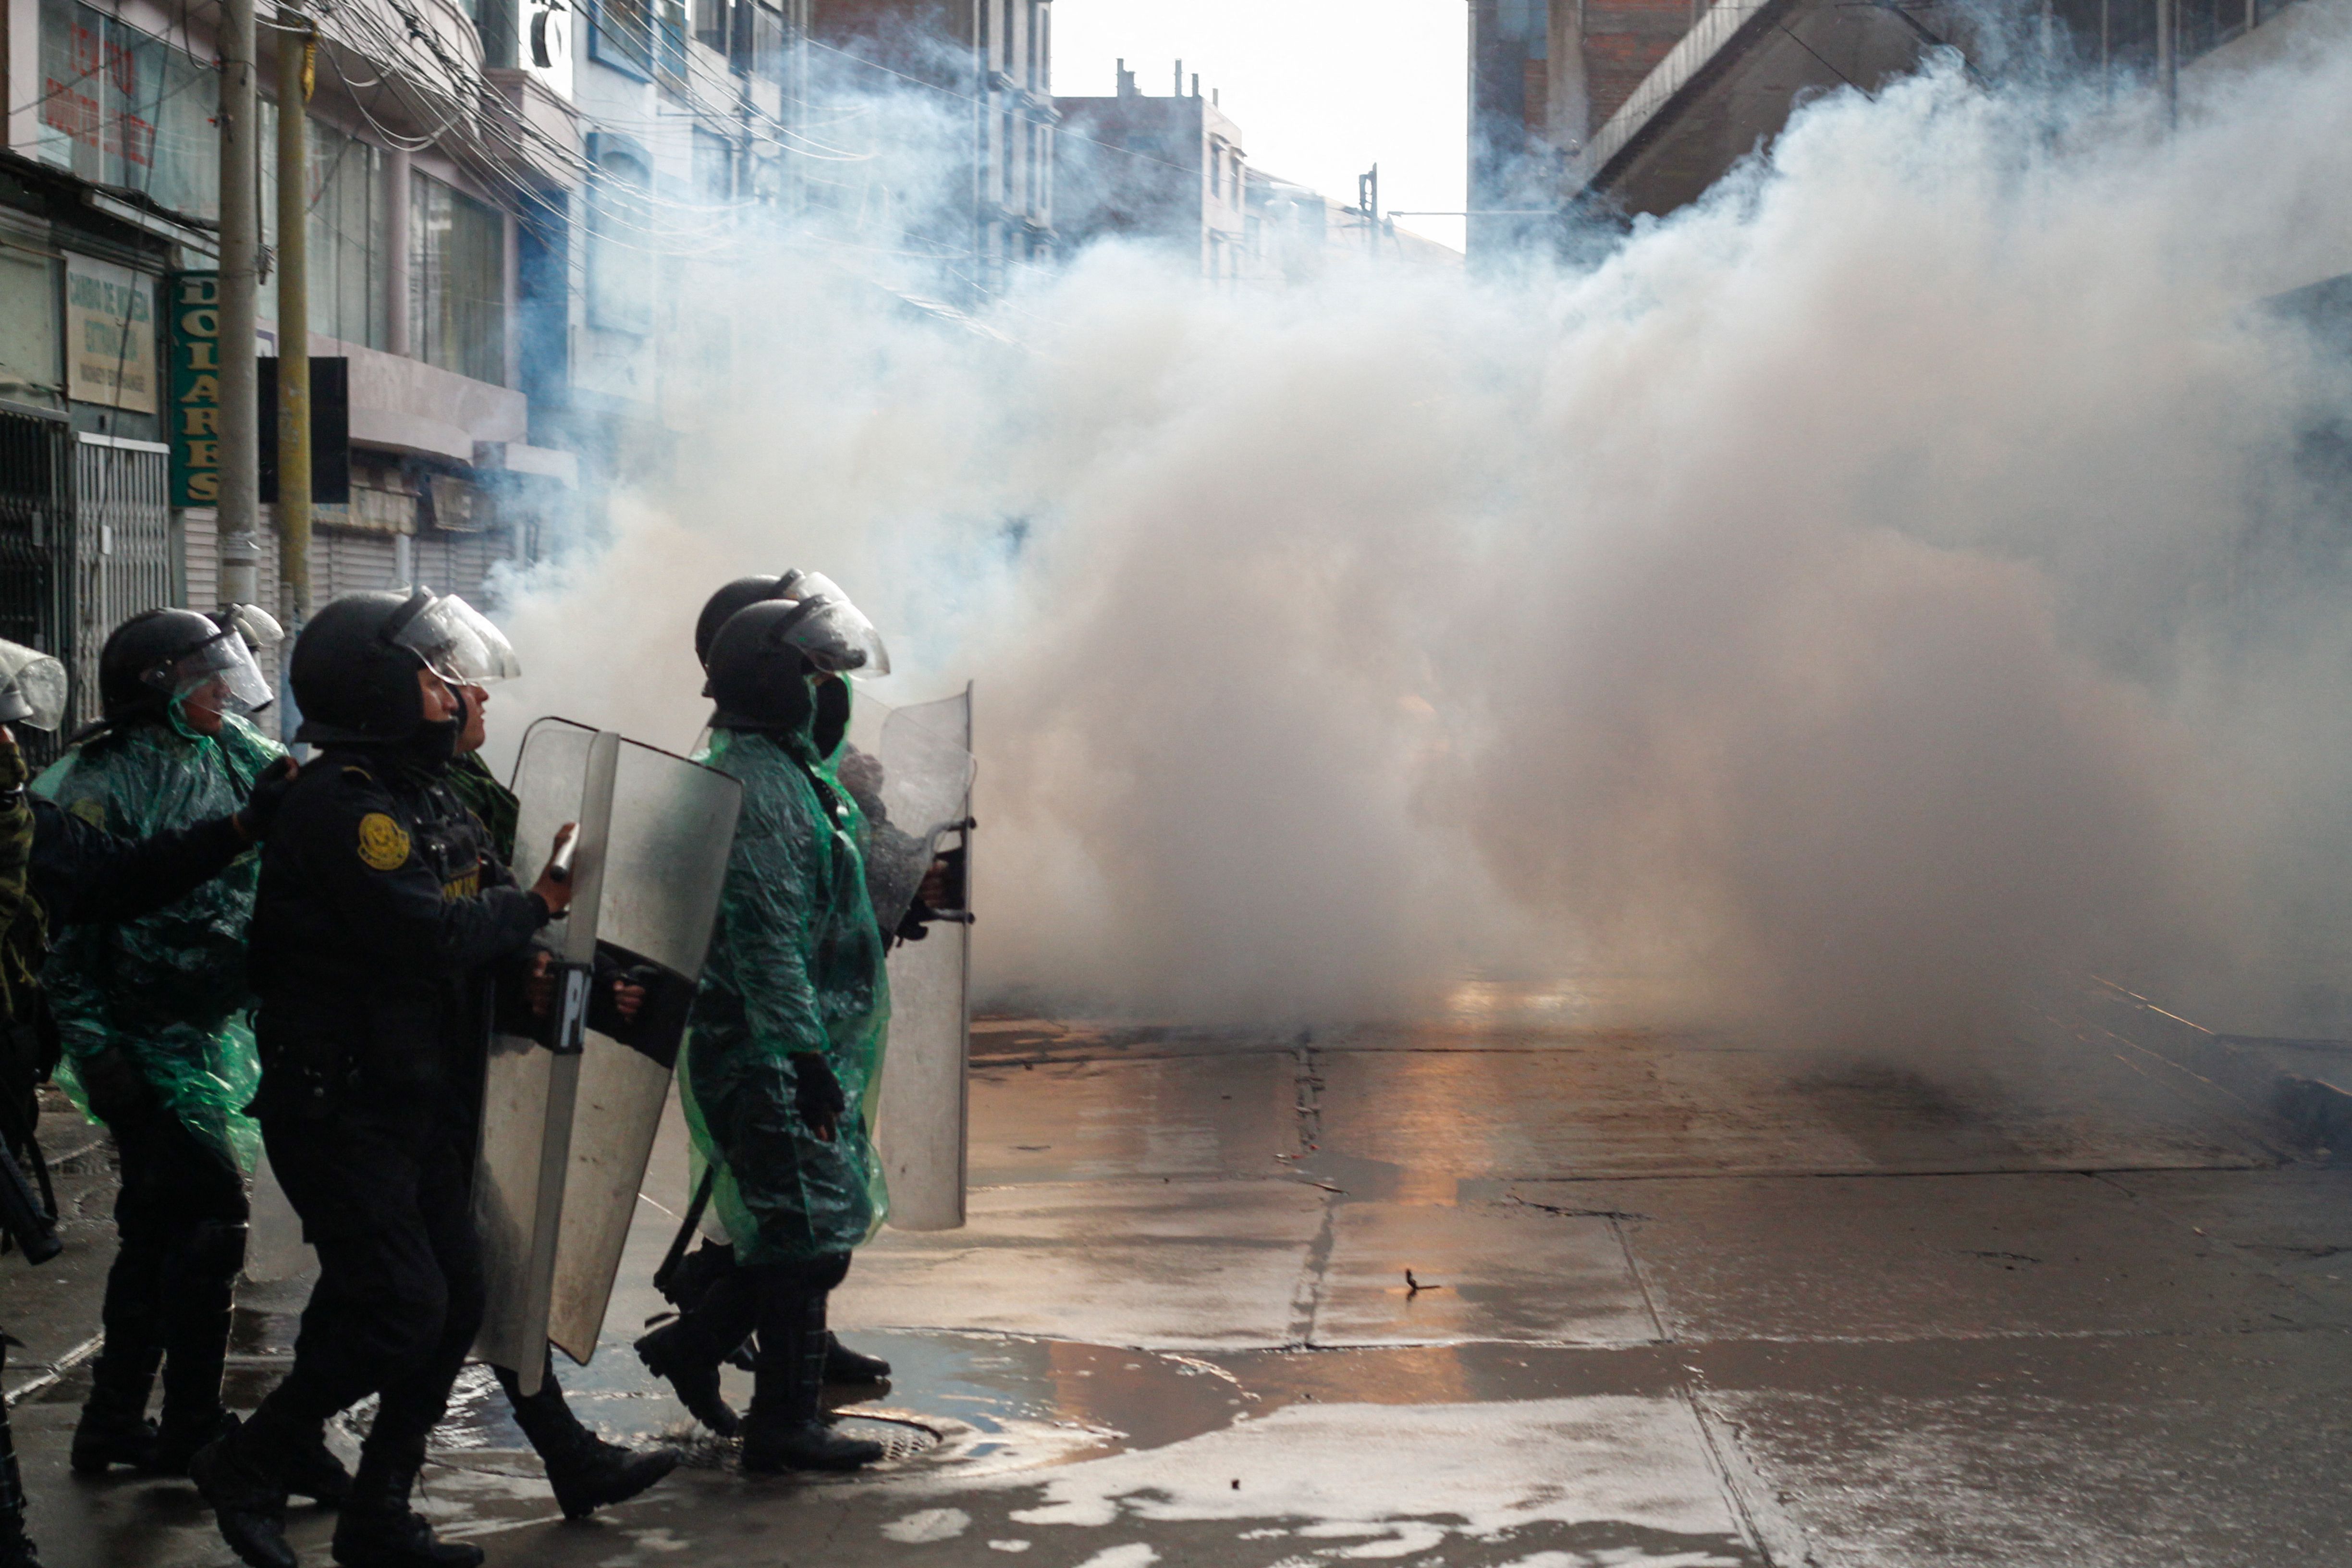 Riot police clash with anti-government protesters in Peru, on Jan. 9.